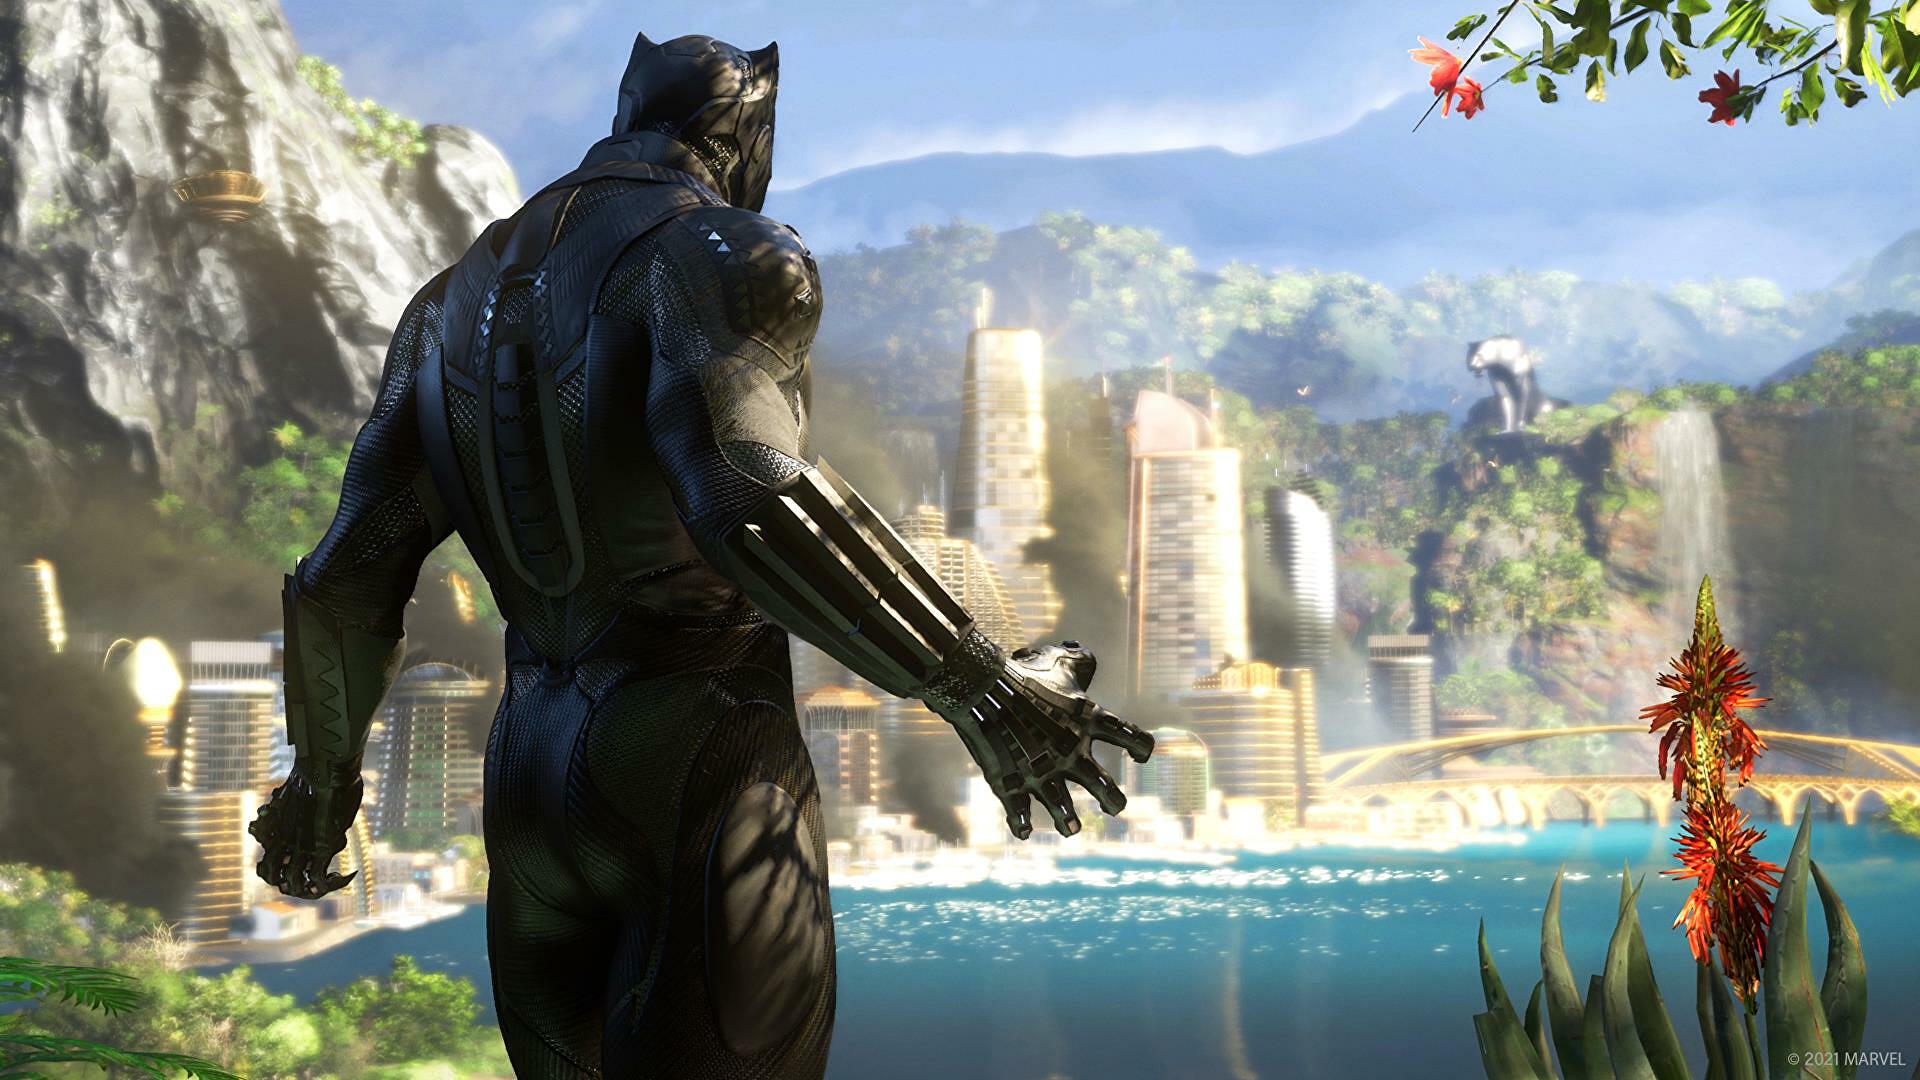 Developing a new open world game for Black Panther!